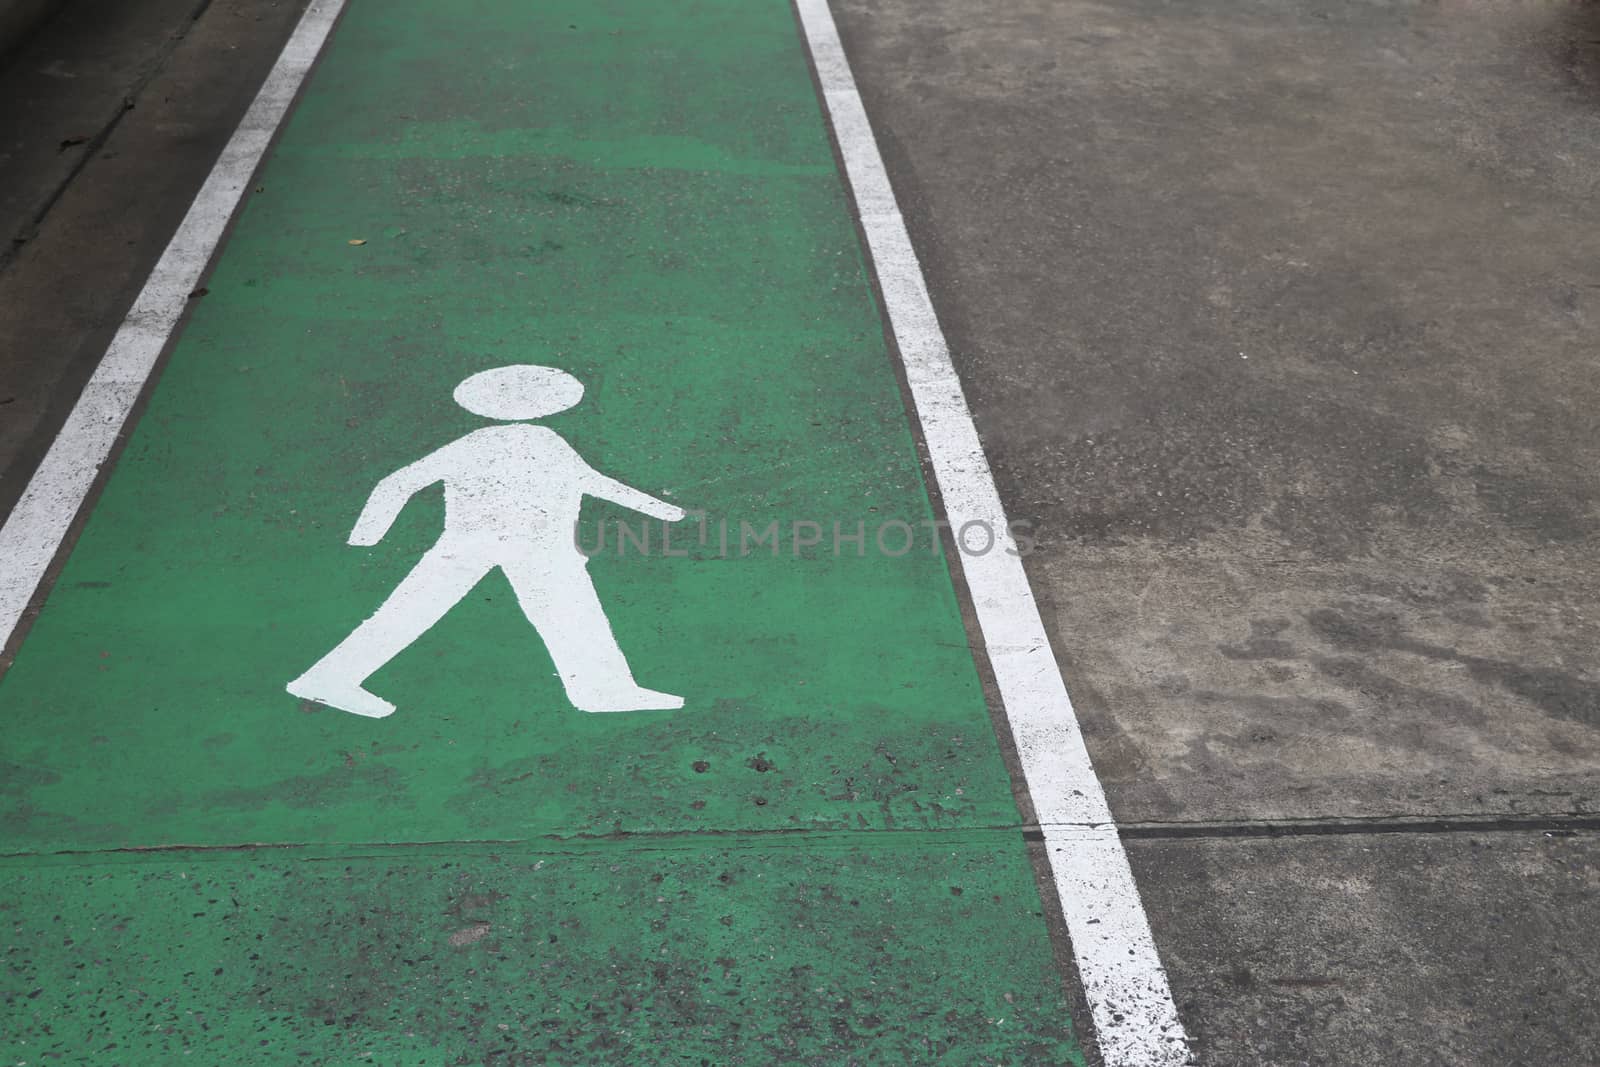 Walking way for the safety of traveling. Symbol for pedestrian paths. Specific pathway for pedestrians. by Eungsuwat